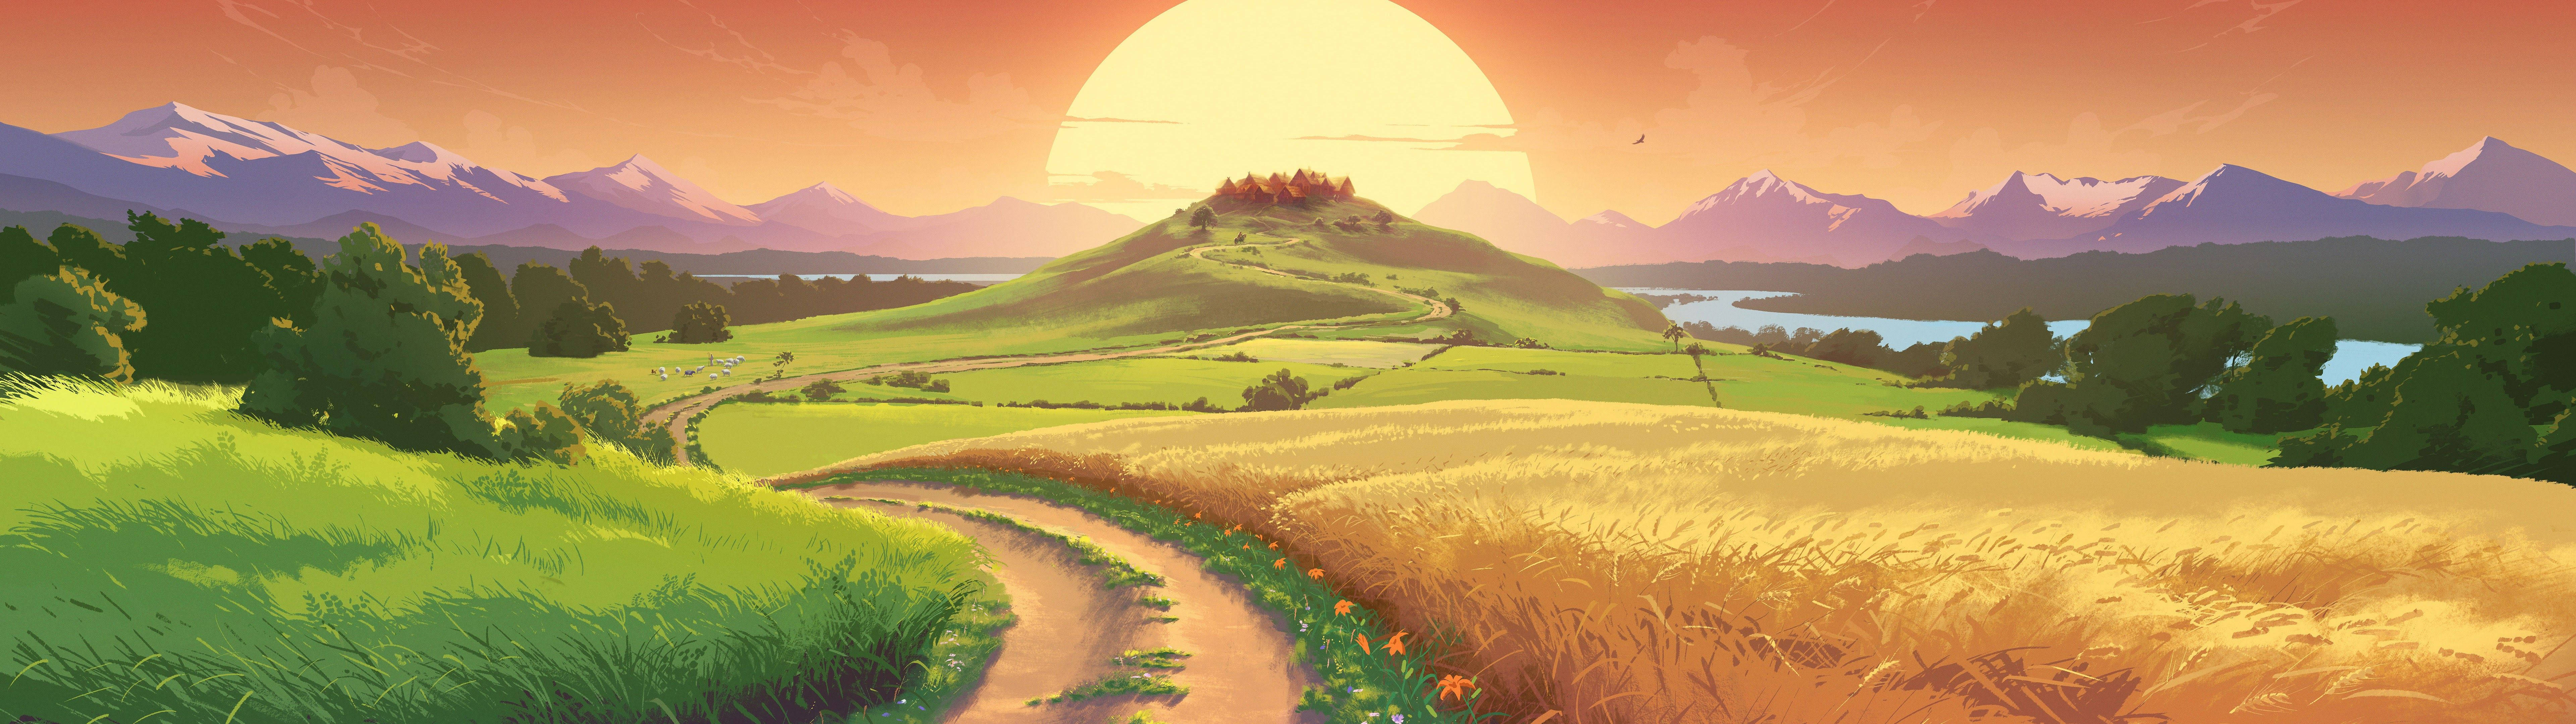 4k Dual Monitor Art Of Grassy Field At Sunset Background